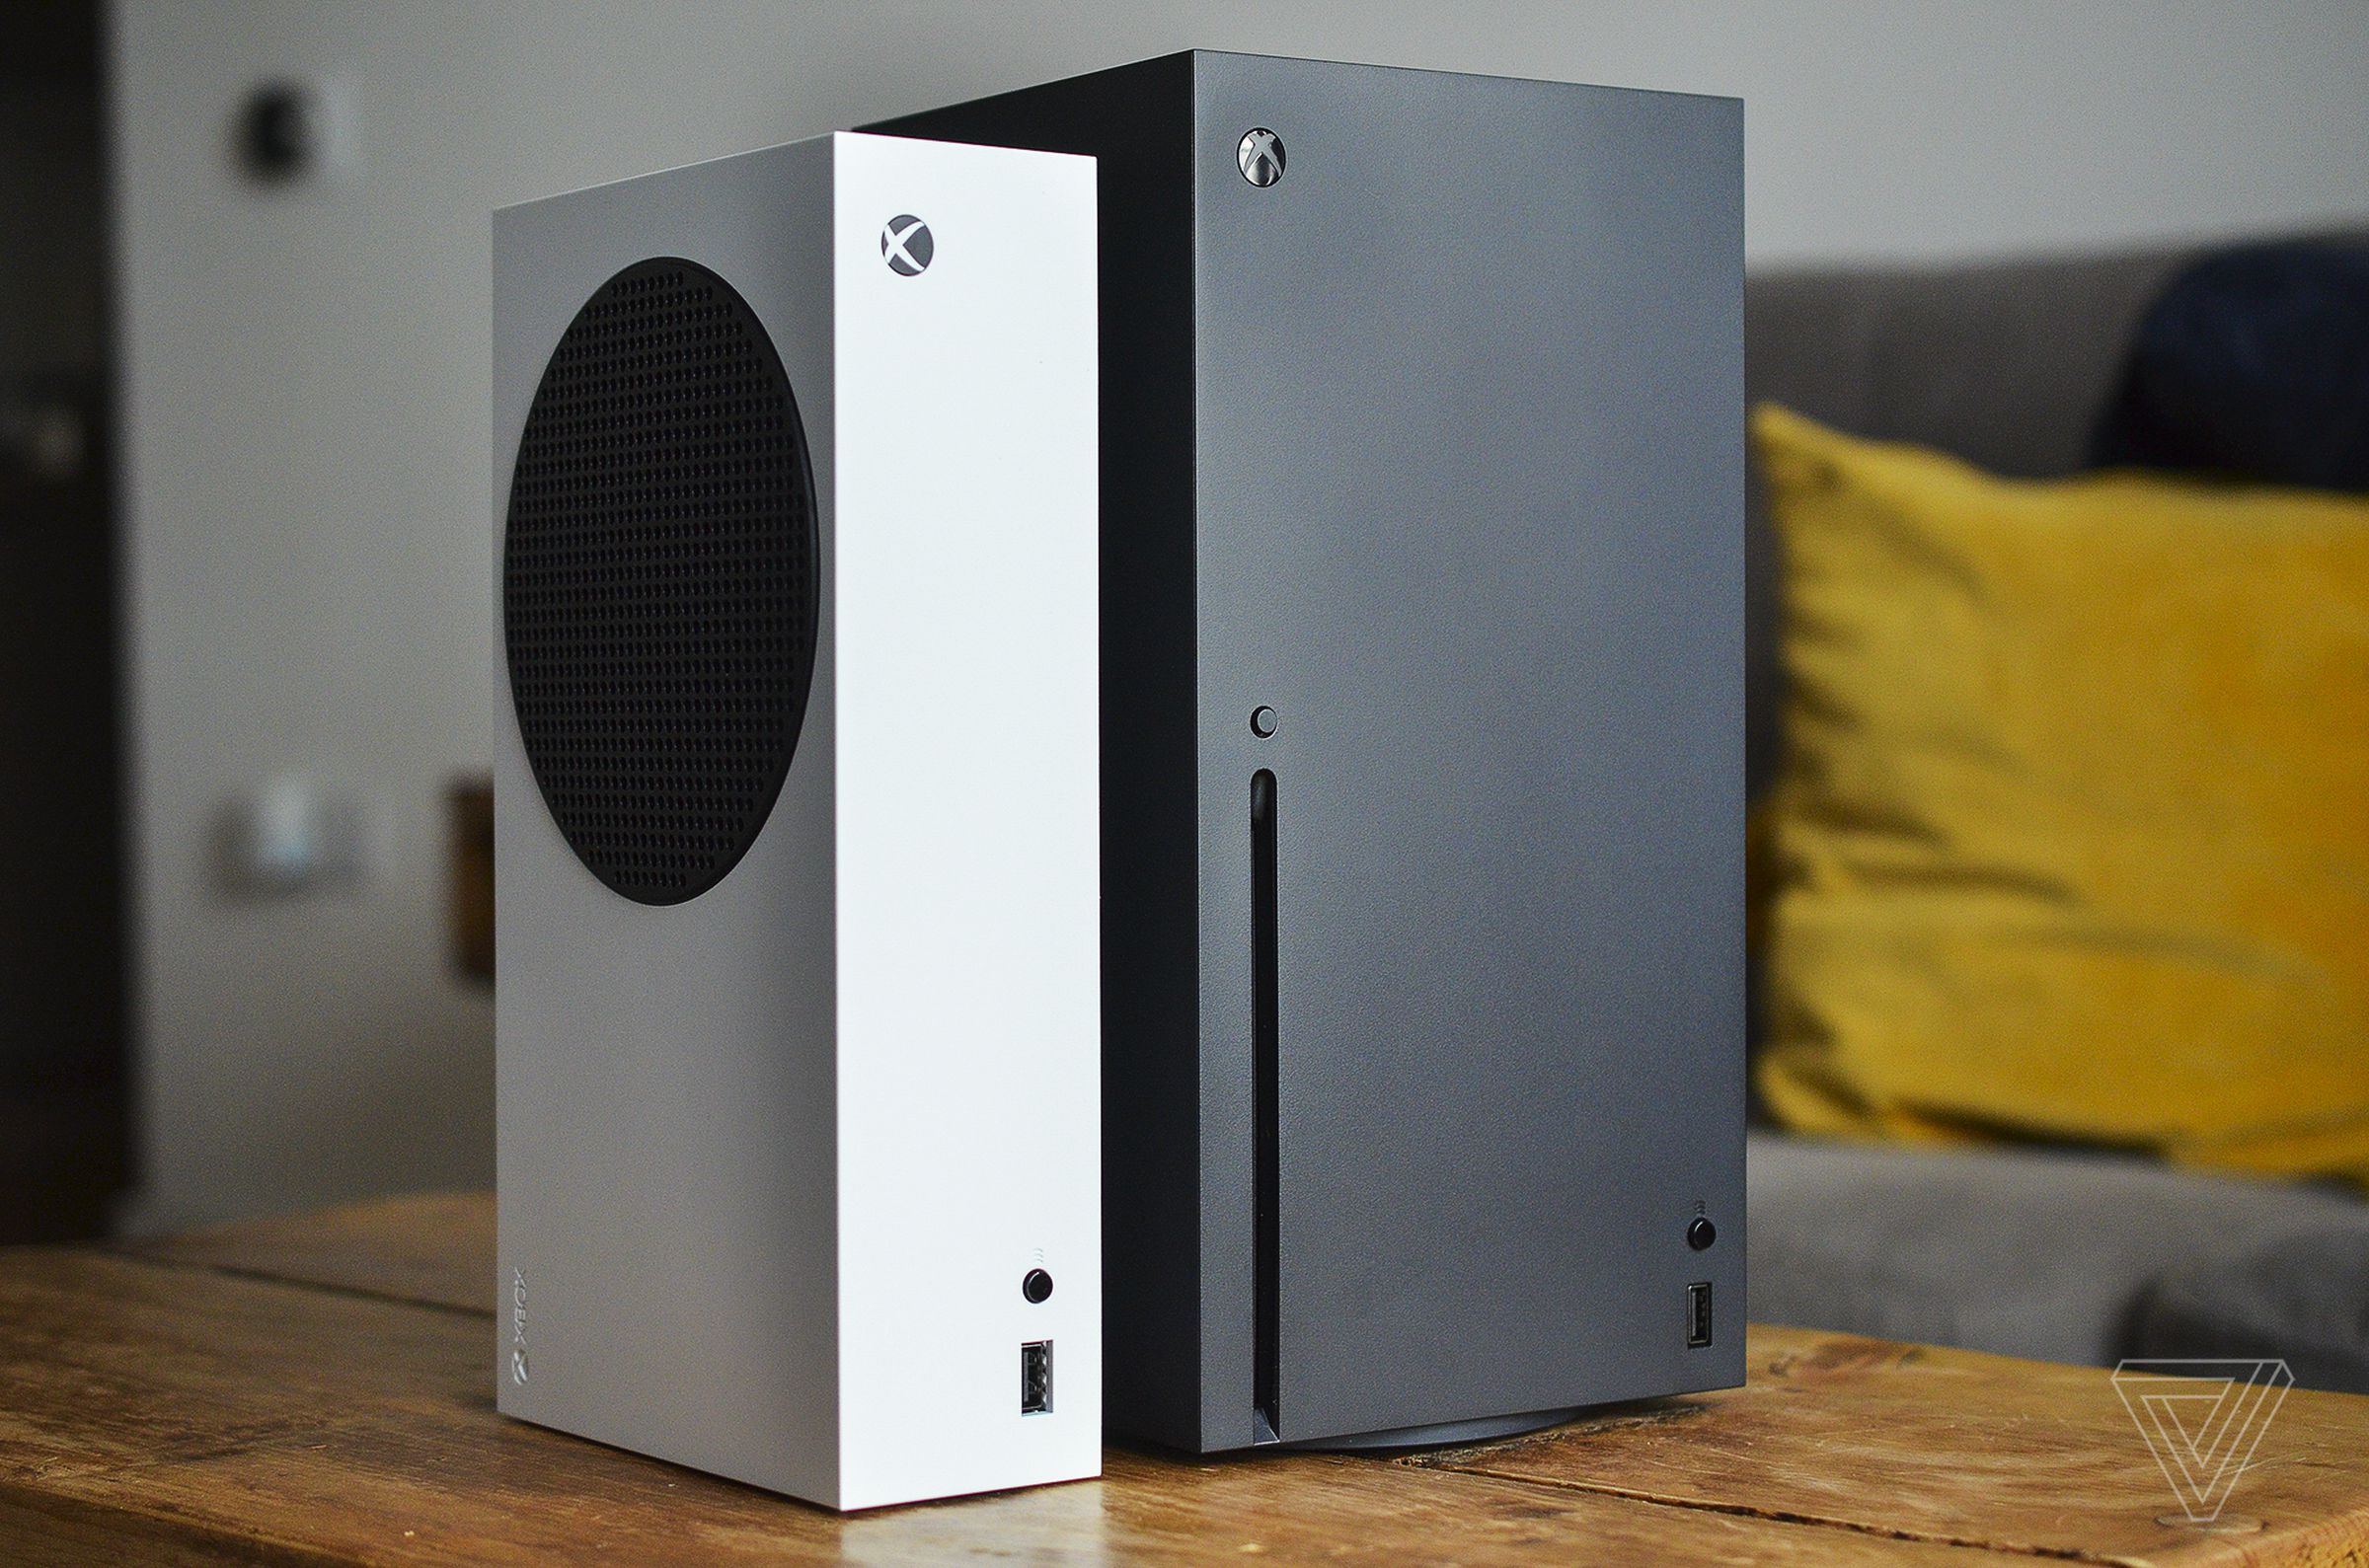 Microsoft's white Xbox Series S sits alongside the larger, black Xbox Series X on a wooden coffee table in the living room